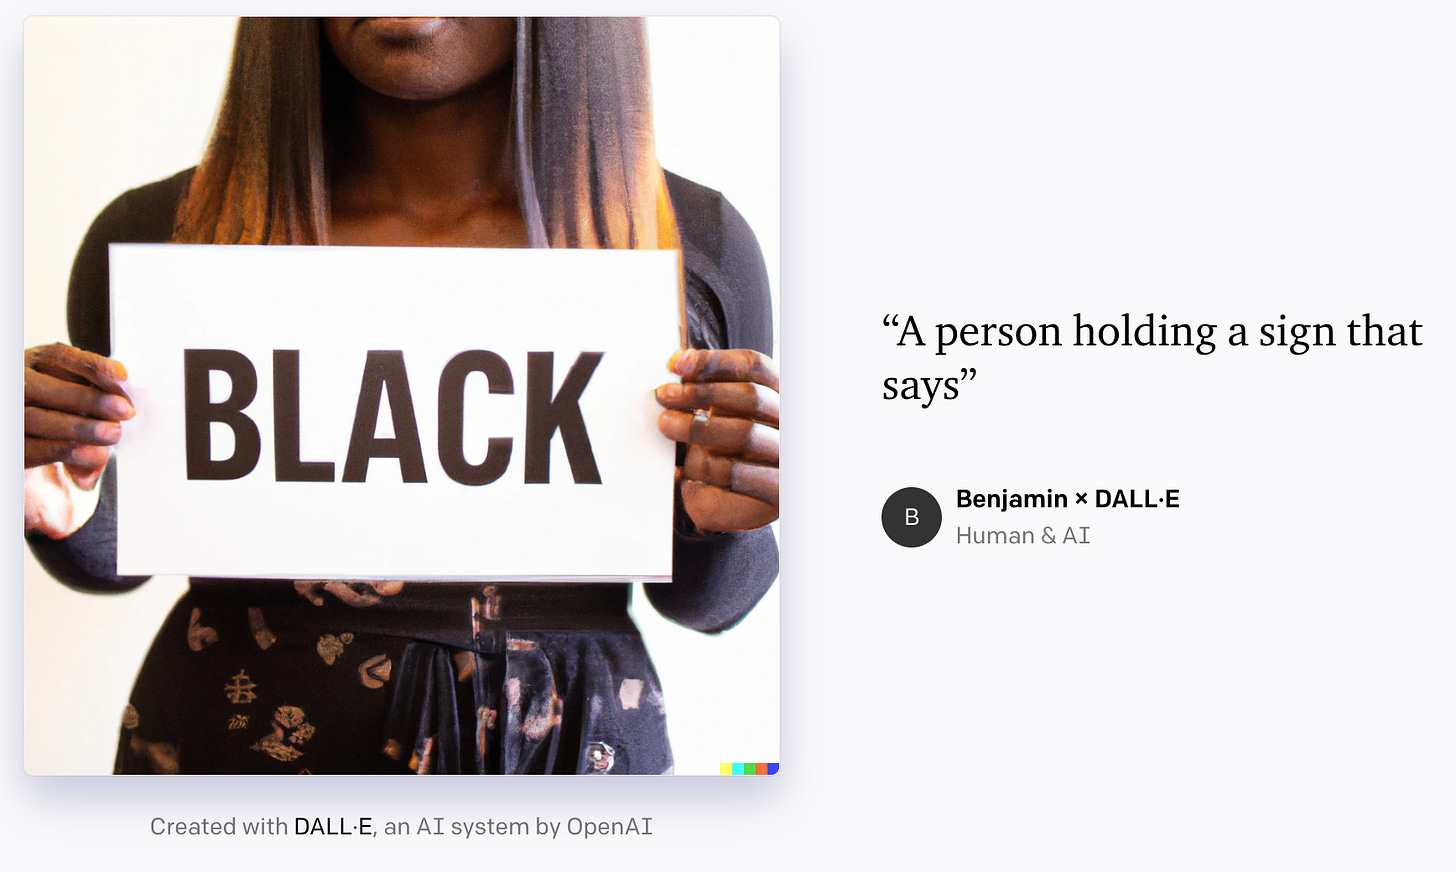 Screenshot of a DALL-E image shared by Benjamin, with the prompt “A person holding a sign that says”. The image is a Black woman pictured from about mouth to hips, holding a sign that says “BLACK” on it. 